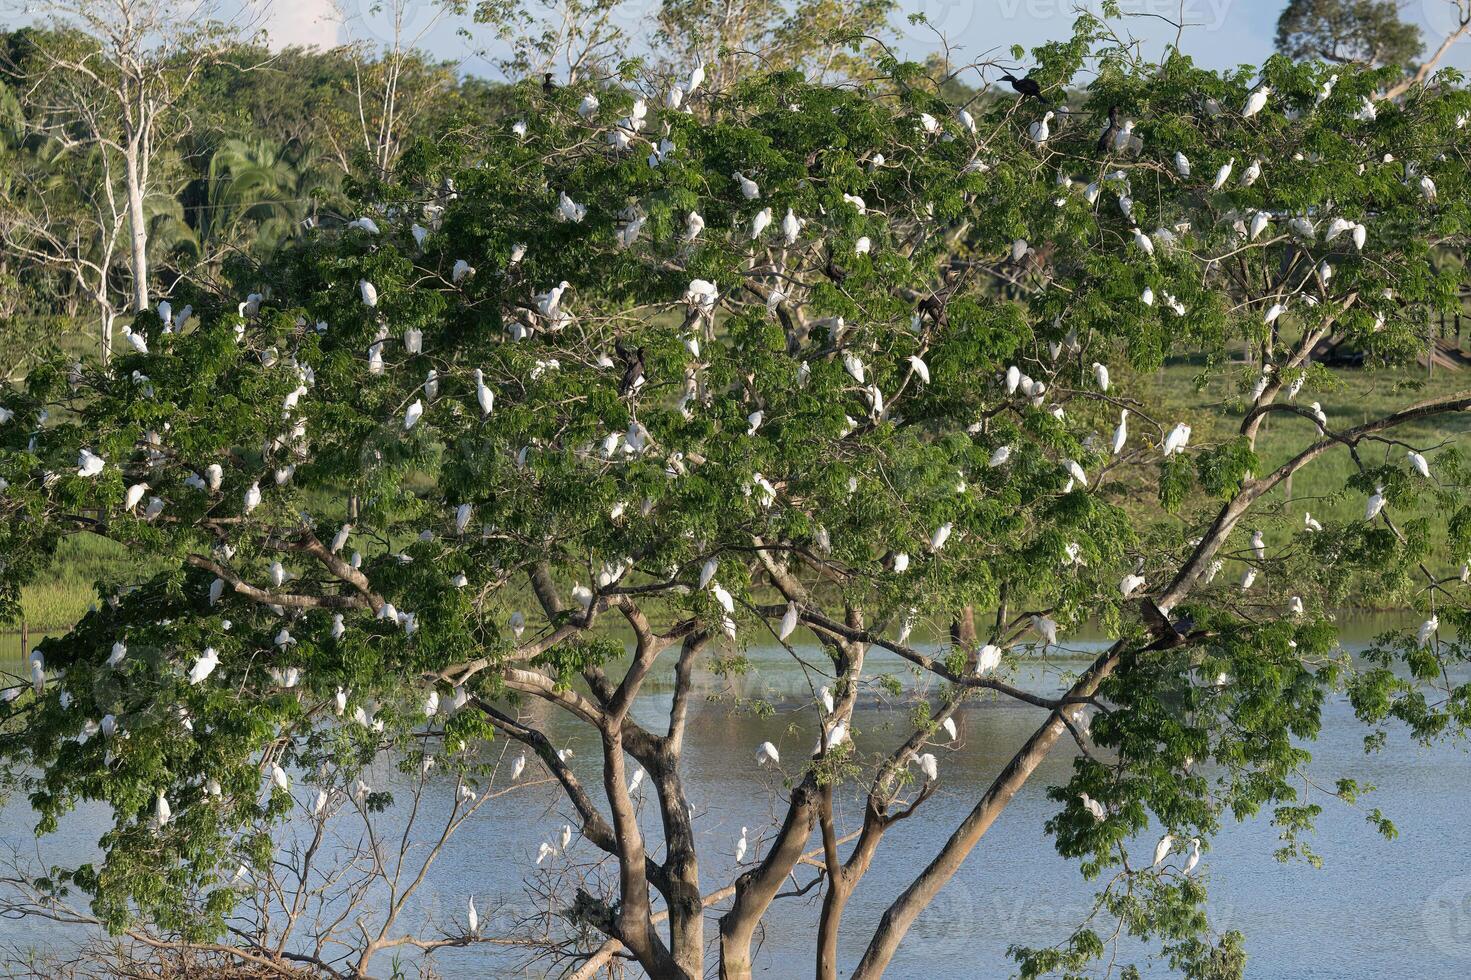 Western Cattle Egrets, Bubulcus ibis, roosting in a tree, late afternoon, Amazon Basin, Brazil photo